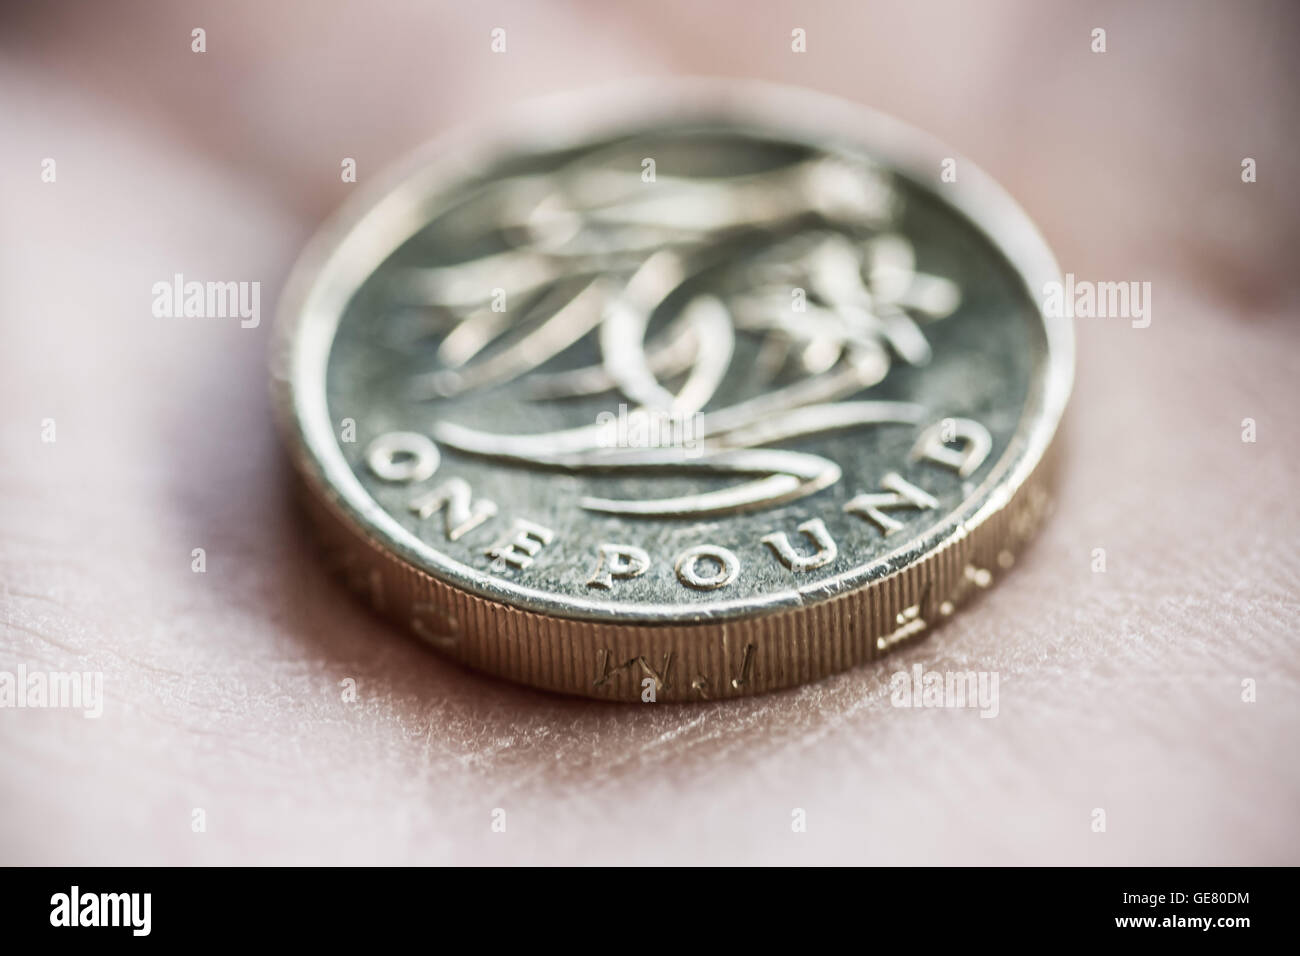 British £1 pound coin sterling currency Stock Photo